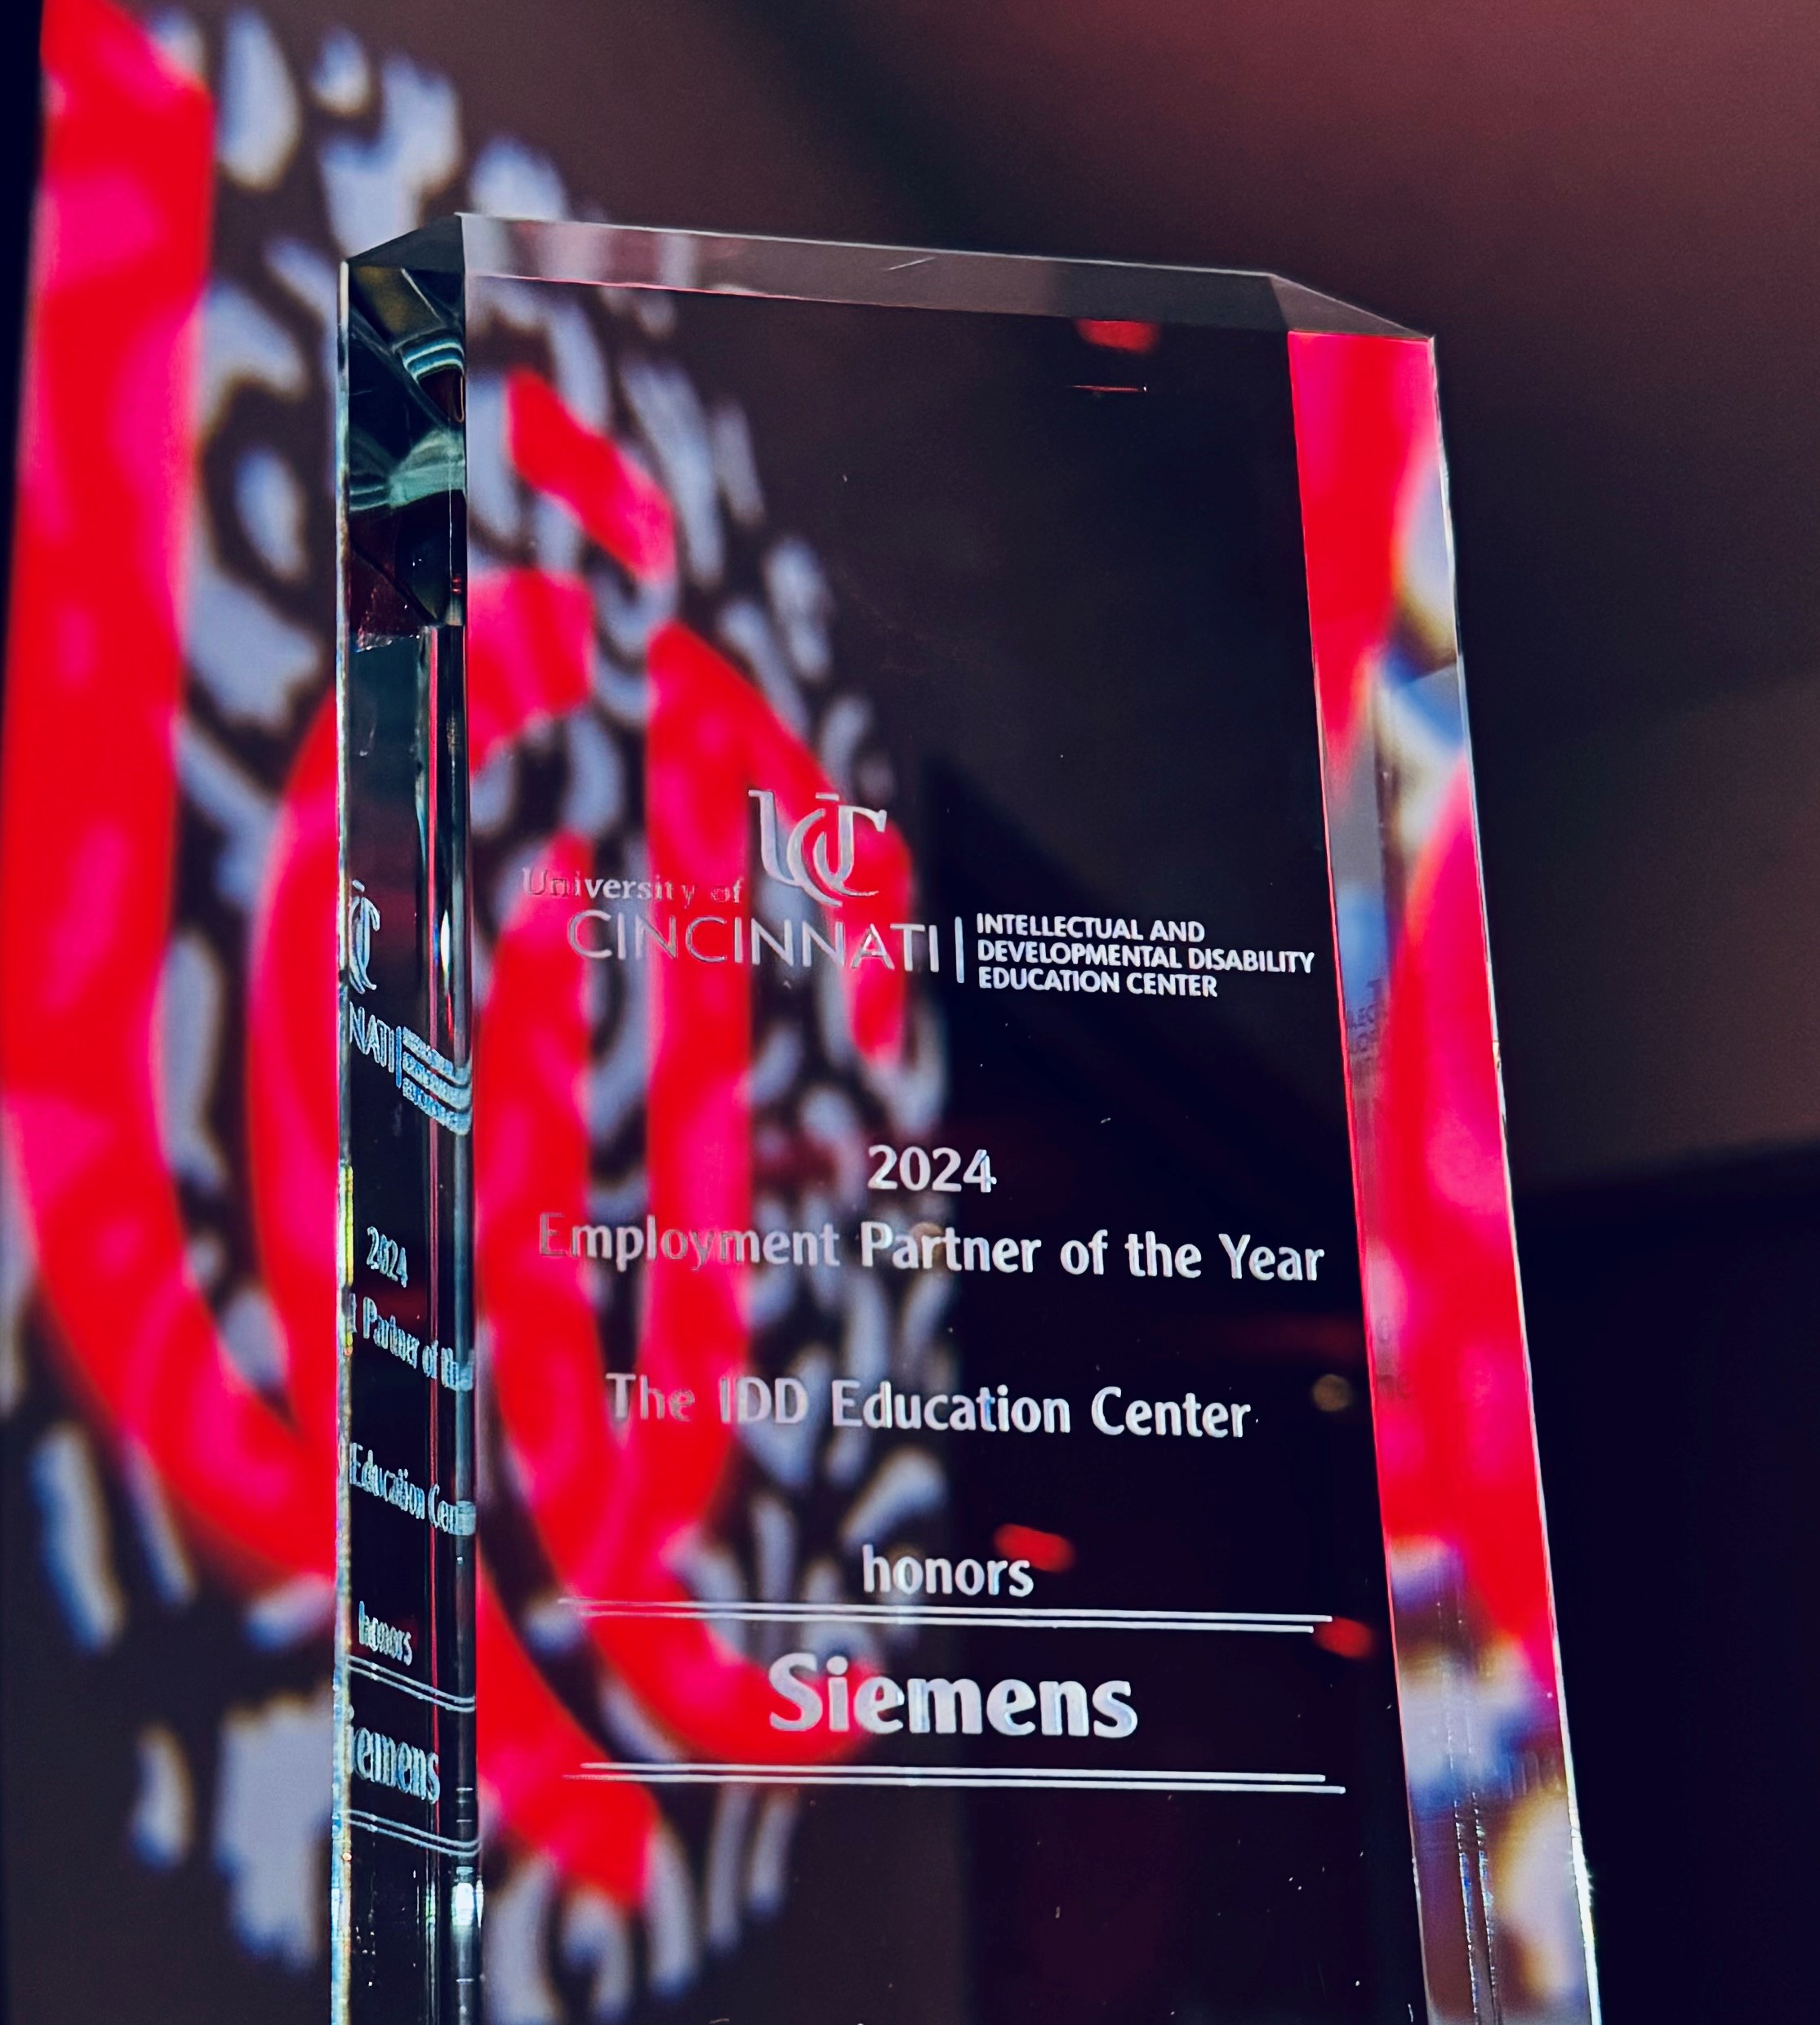 A glass "Employment Partner of the Year" award addressed to Siemens in front of a University of Cincinnati "UC" logo.